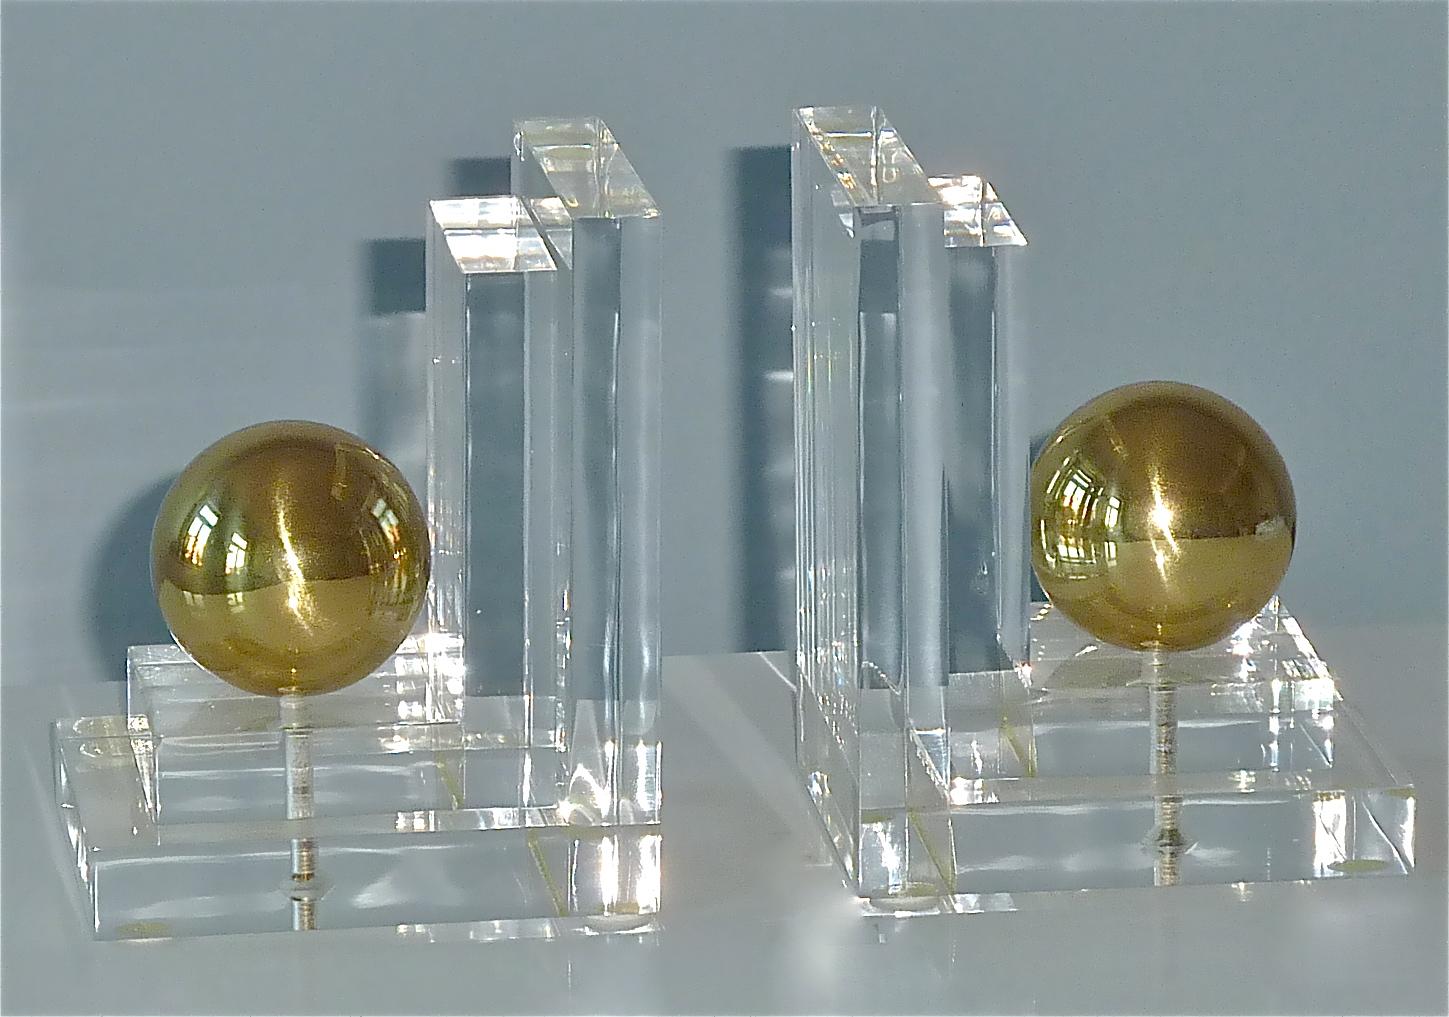 Sculptural pair of French or Italian acrylic lucite clear plastic bookends in Art Deco Style with patinated gilt brass globe balls, Italy or France around 1970s. The chic, elegant and timeless design of the bookends reminds works by Gabriella Crespi